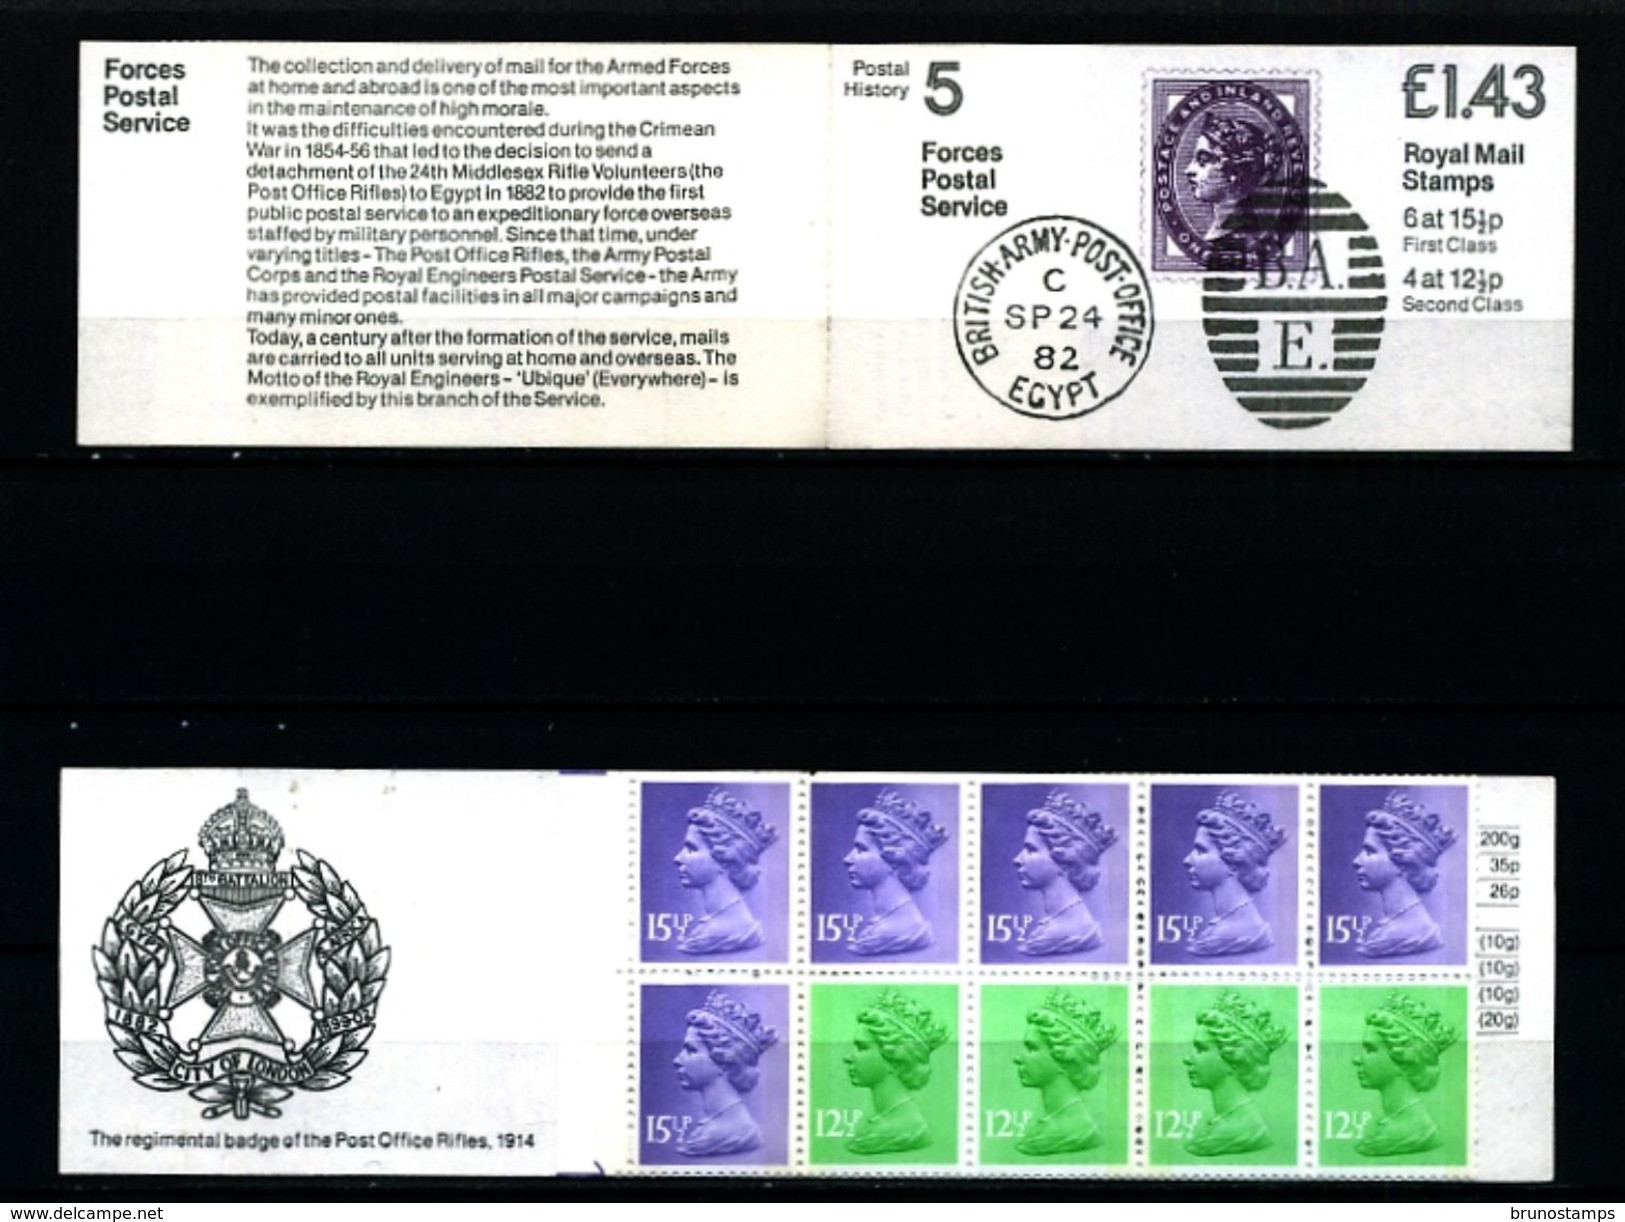 GREAT BRITAIN - 1982  £ 1.43  BOOKLET  FORCES MAIL  LM  MINT NH  SG FN 4a - Markenheftchen